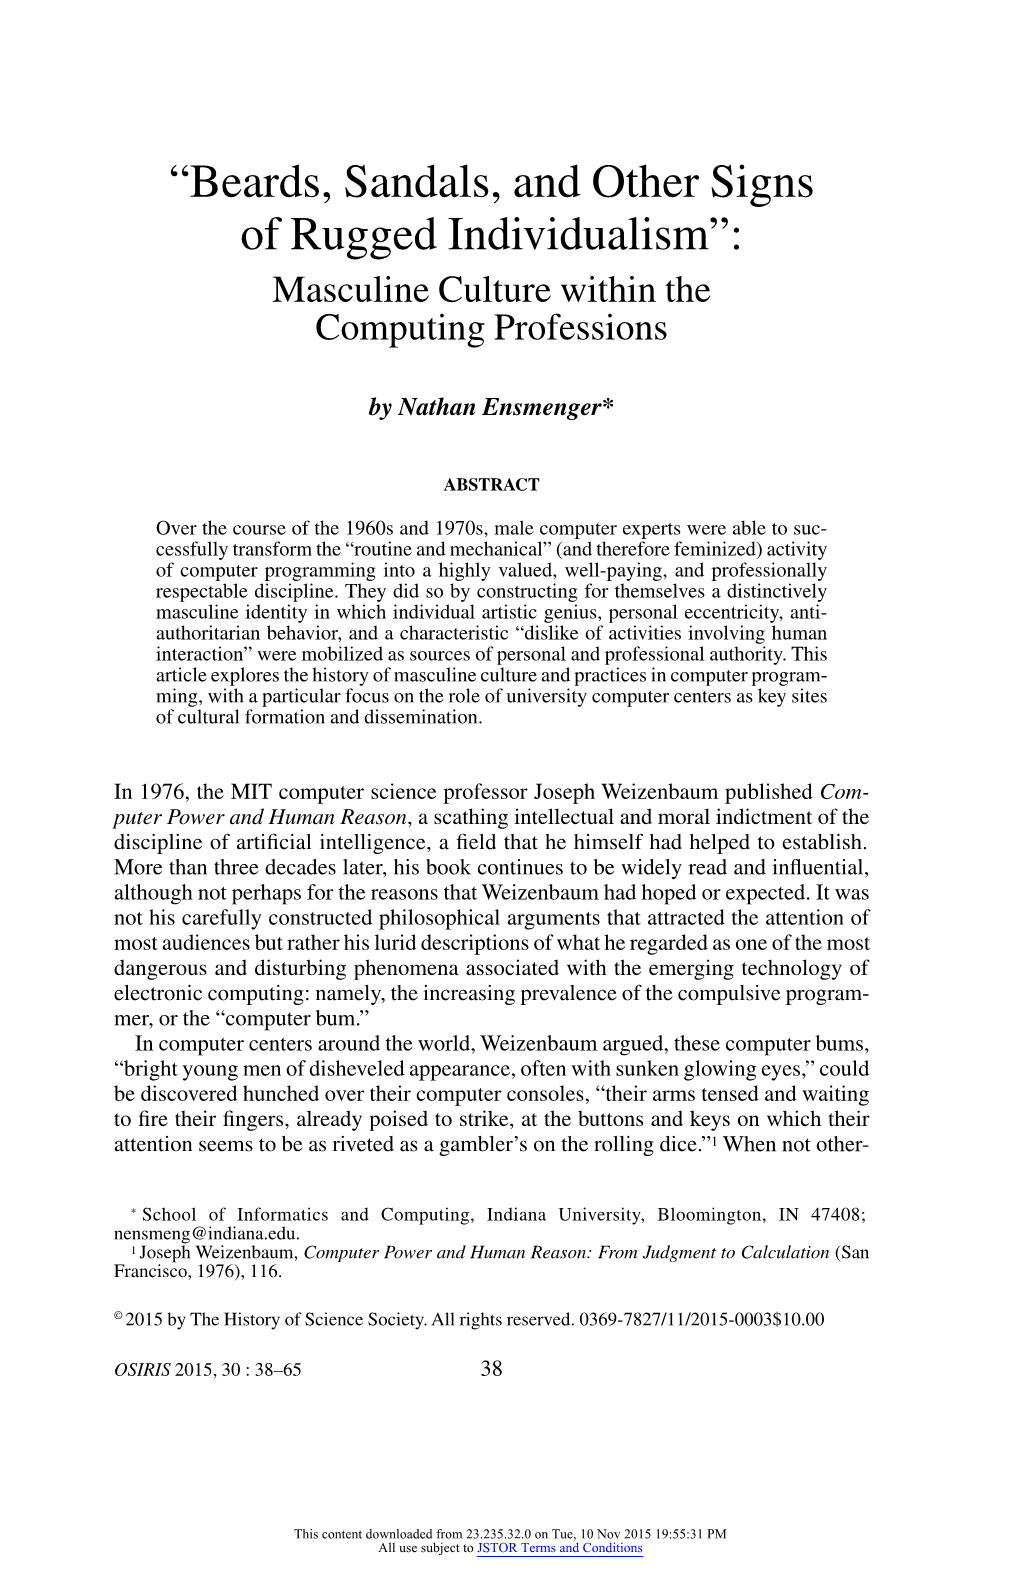 Beards, Sandals, and Other Signs of Rugged Individualism”: Masculine Culture Within the Computing Professions